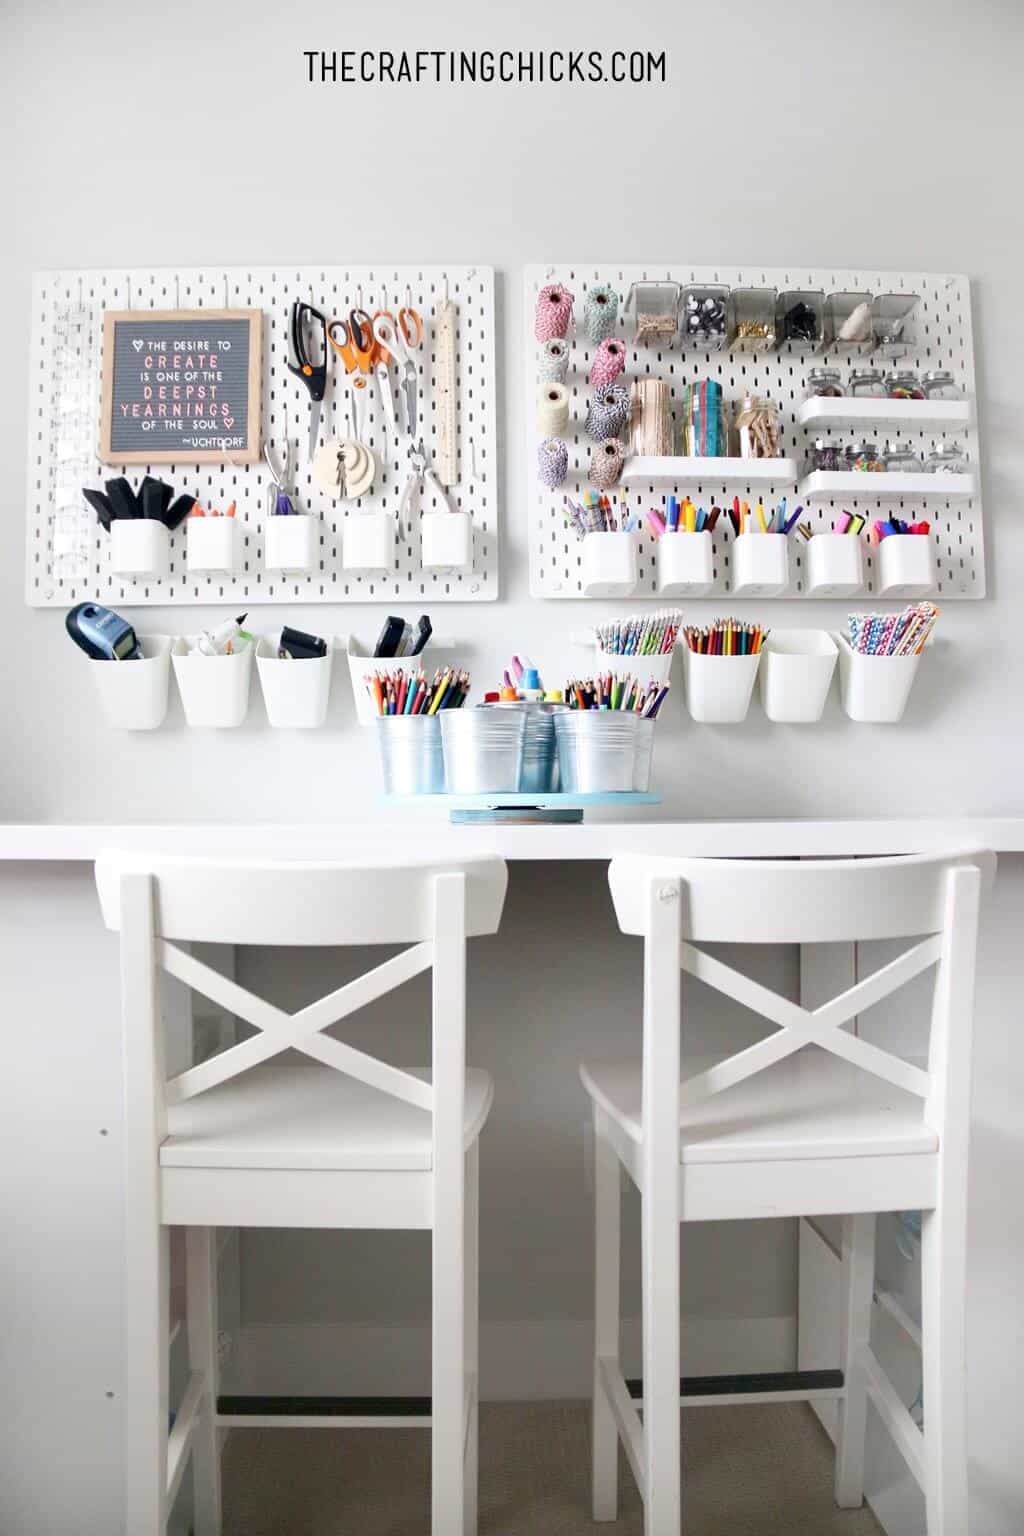 21 Craft Organization Ideas on a Budget - Southern Crush at Home